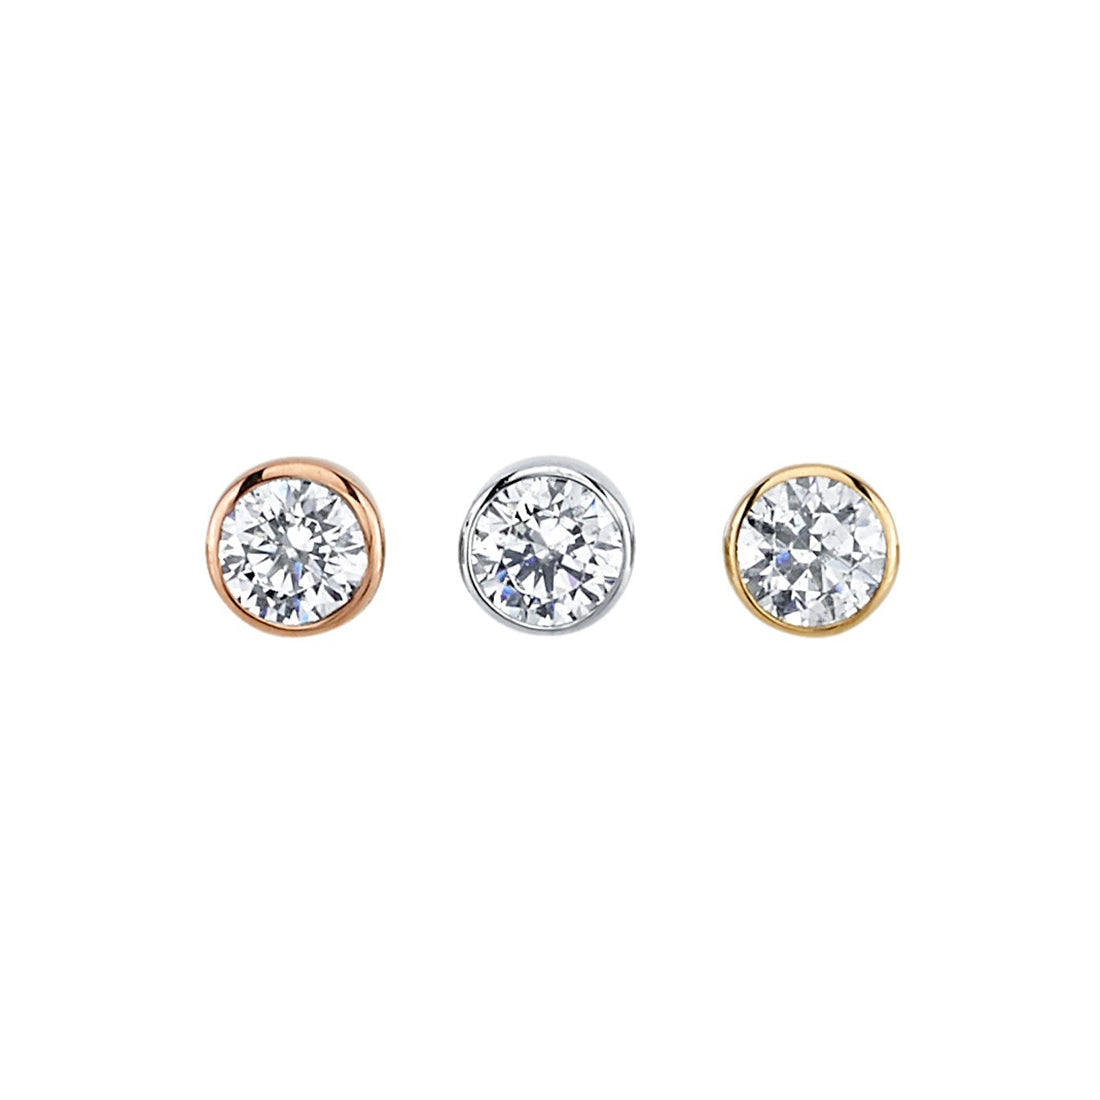 BVLA's "Round Bezel" with Diamond shown 3 times from left to right in 14k Rose Gold, 14k White Gold and 14k Yellow Gold